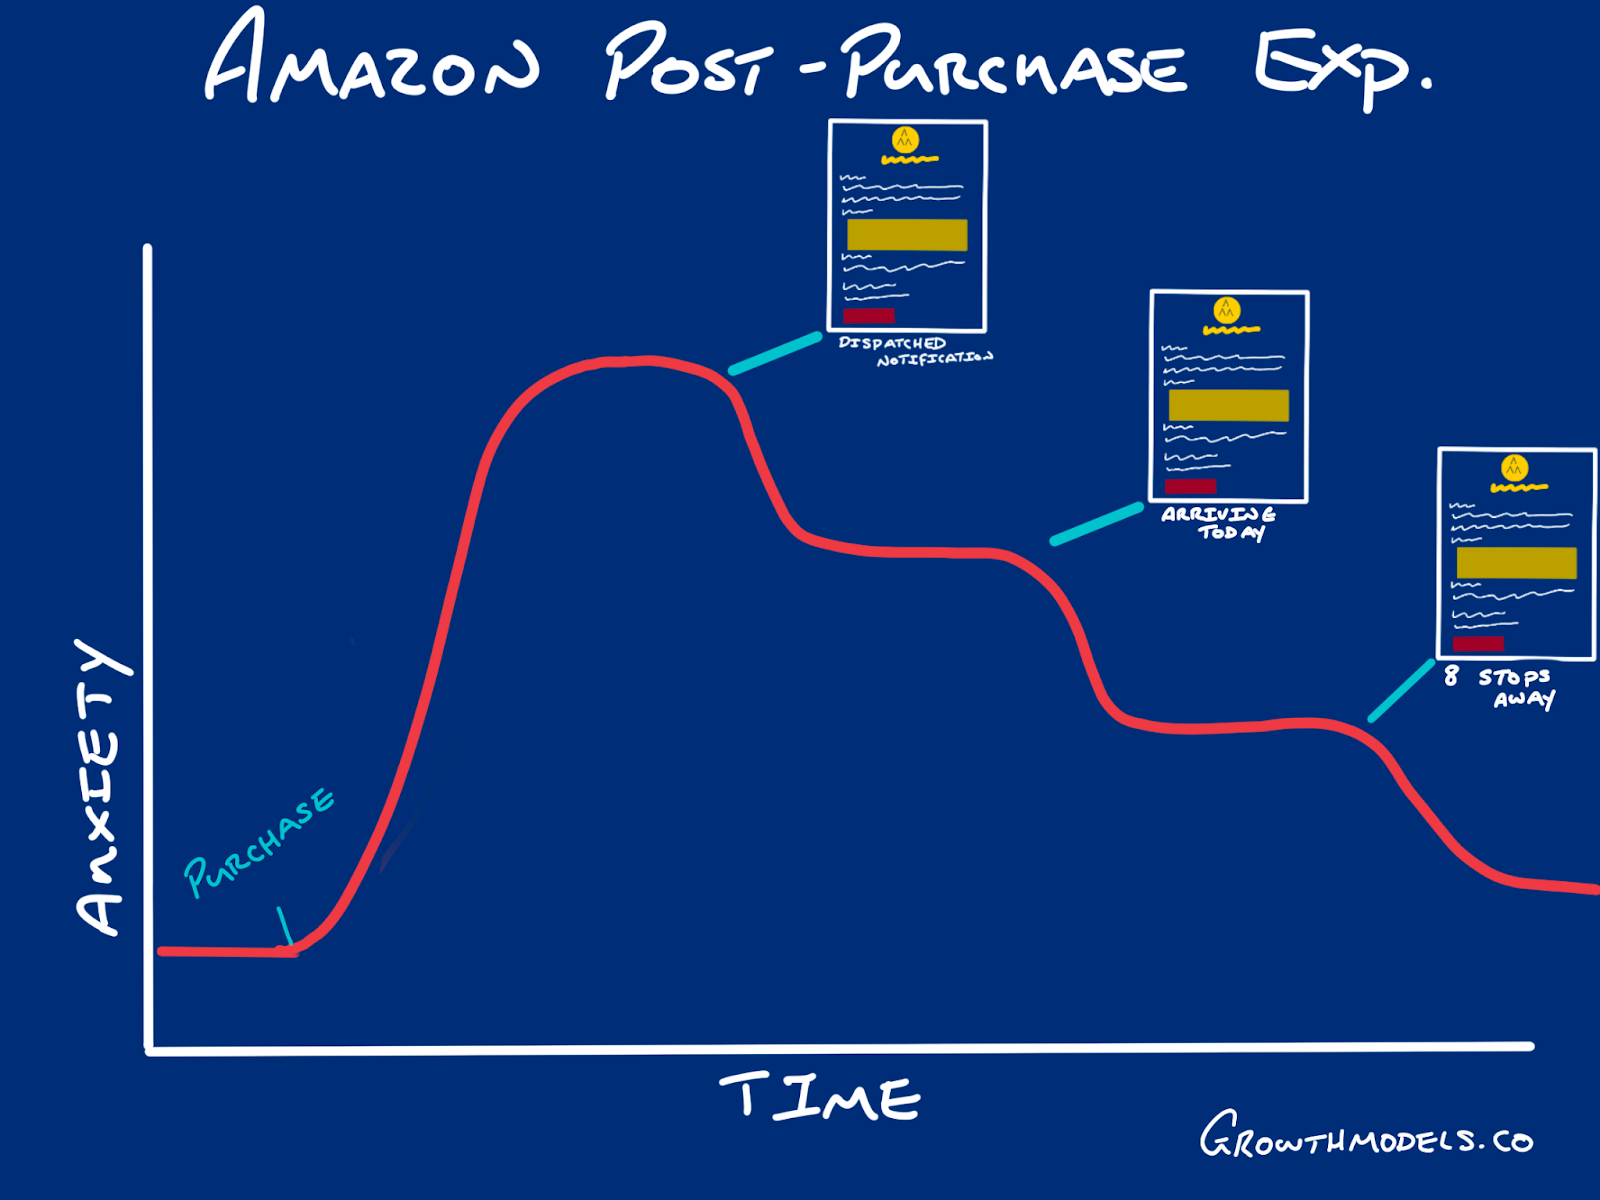 Amazon reduces anxiety at multiple stages